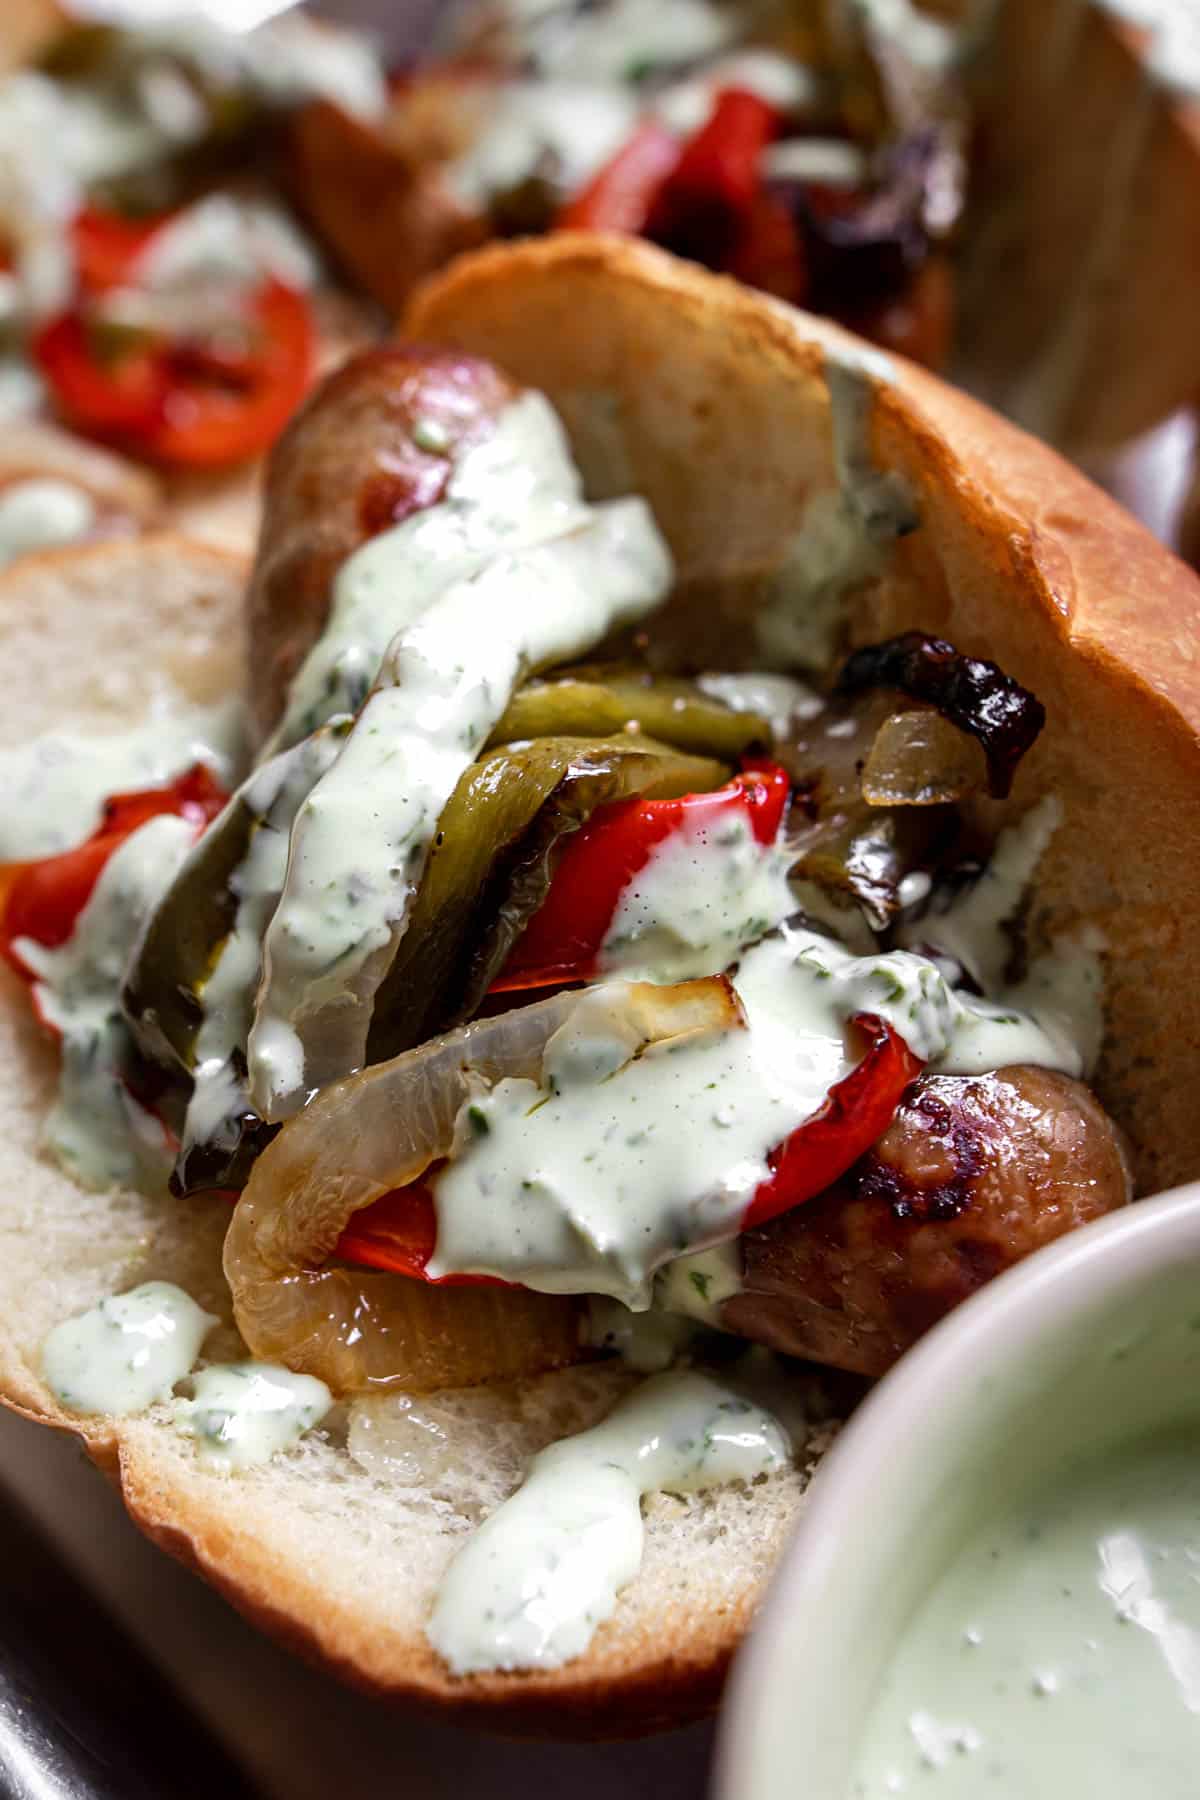 Sausage on a bun with basil mayo sauce and roasted peppers and onions.